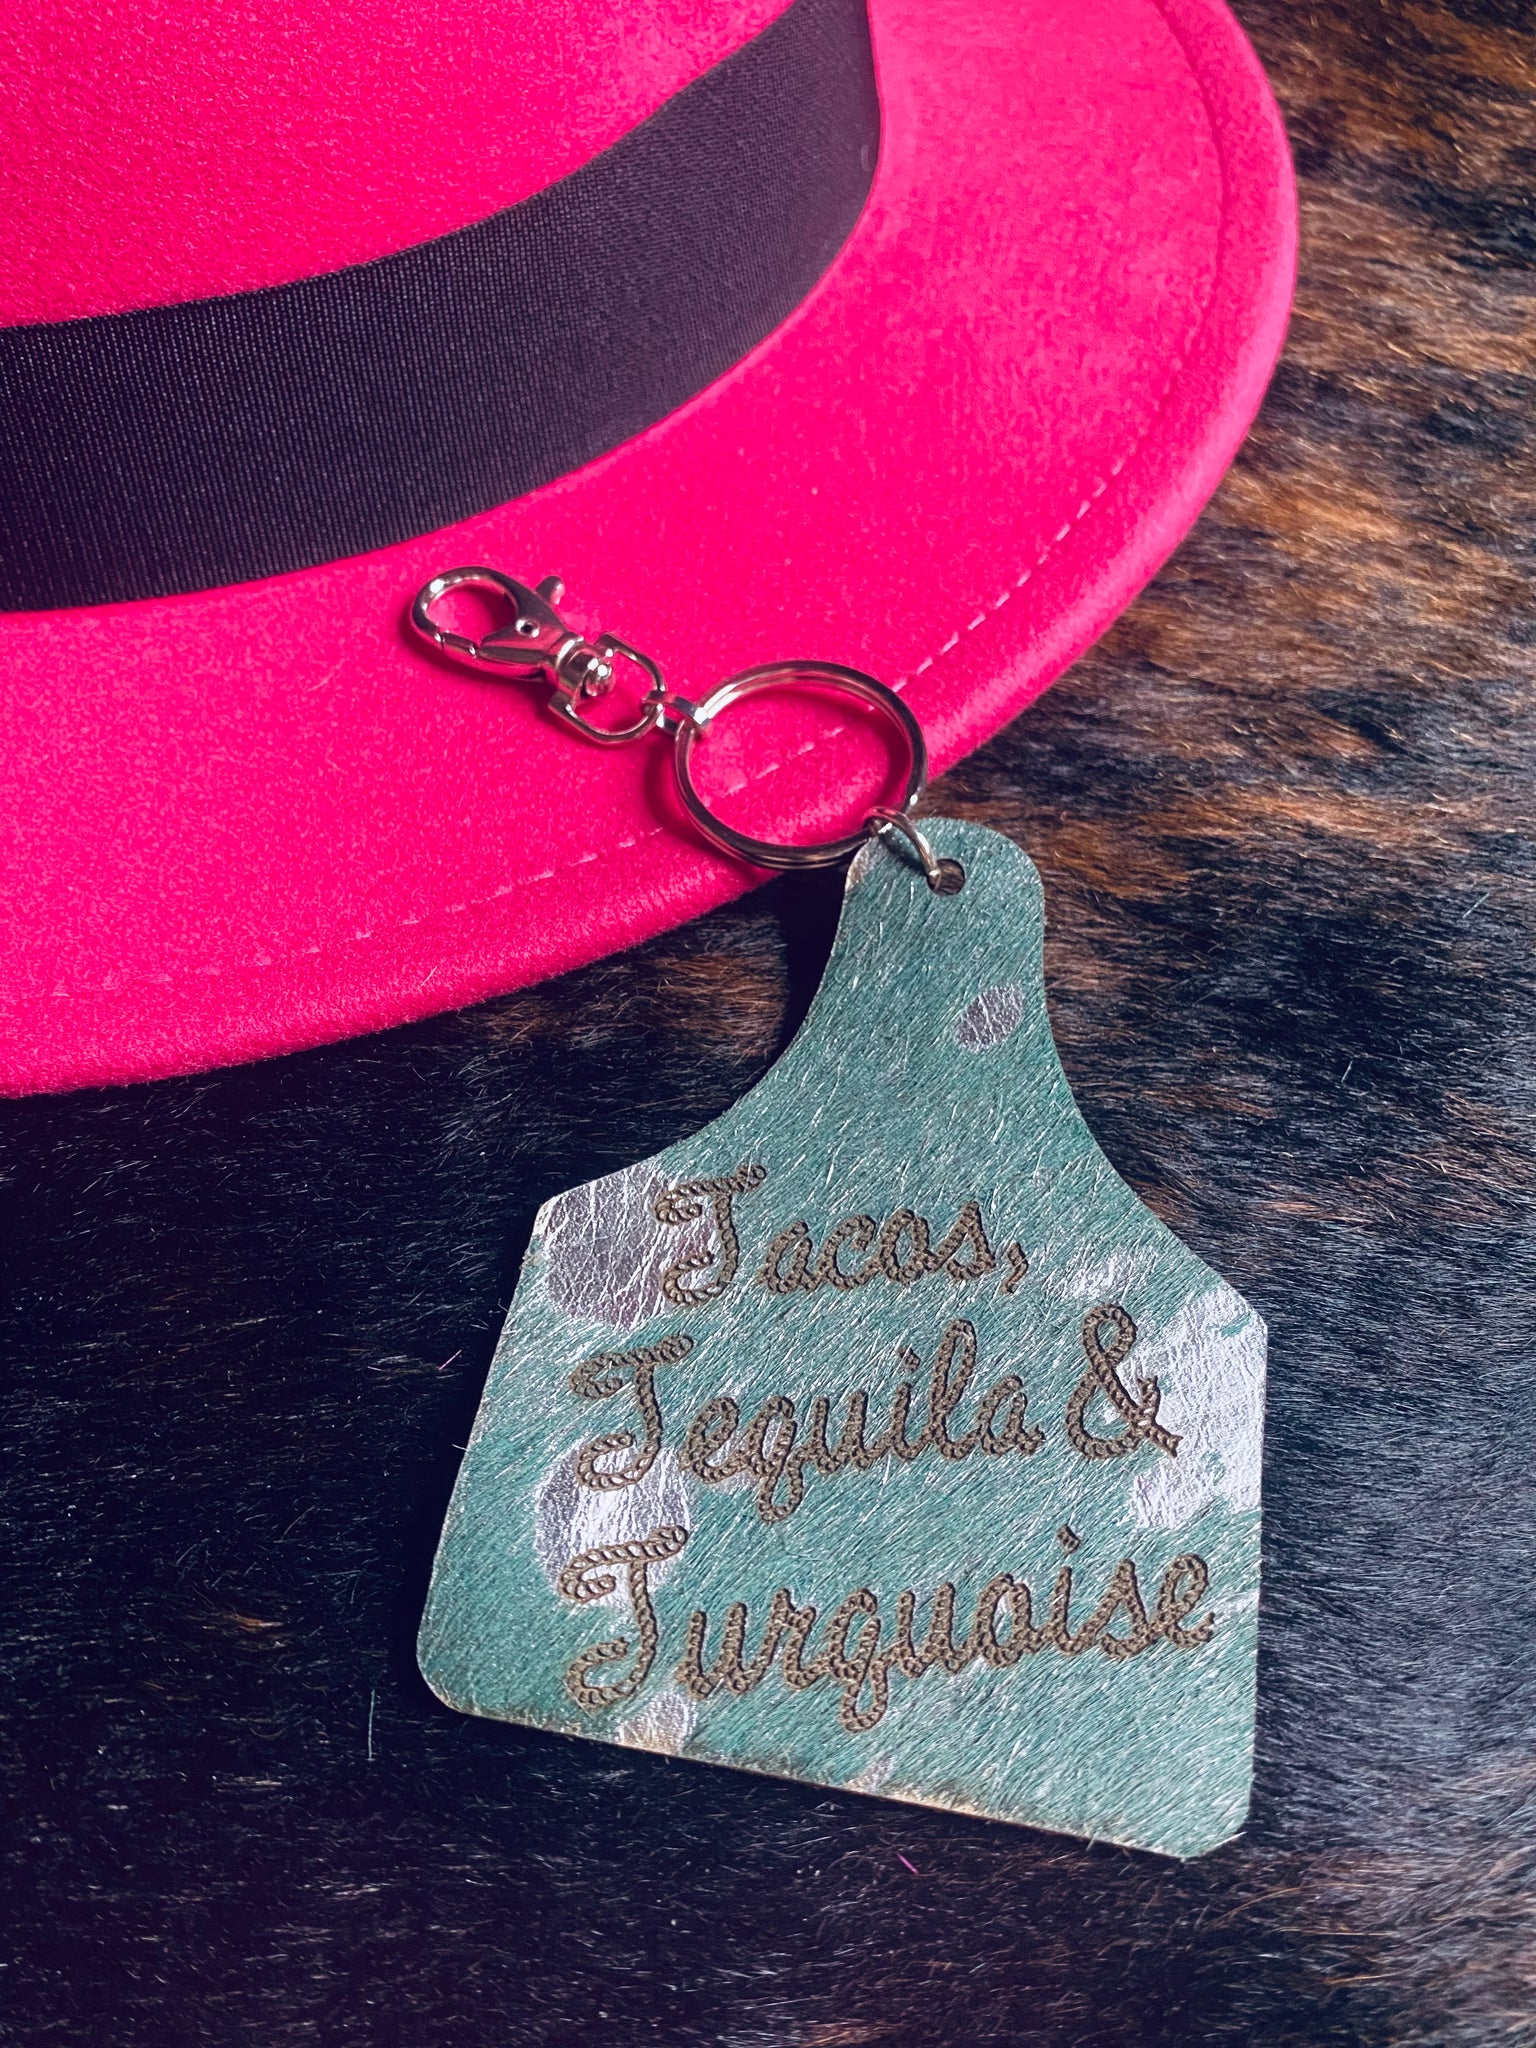 Hide Keychain - Tacos Tequila Turquoise